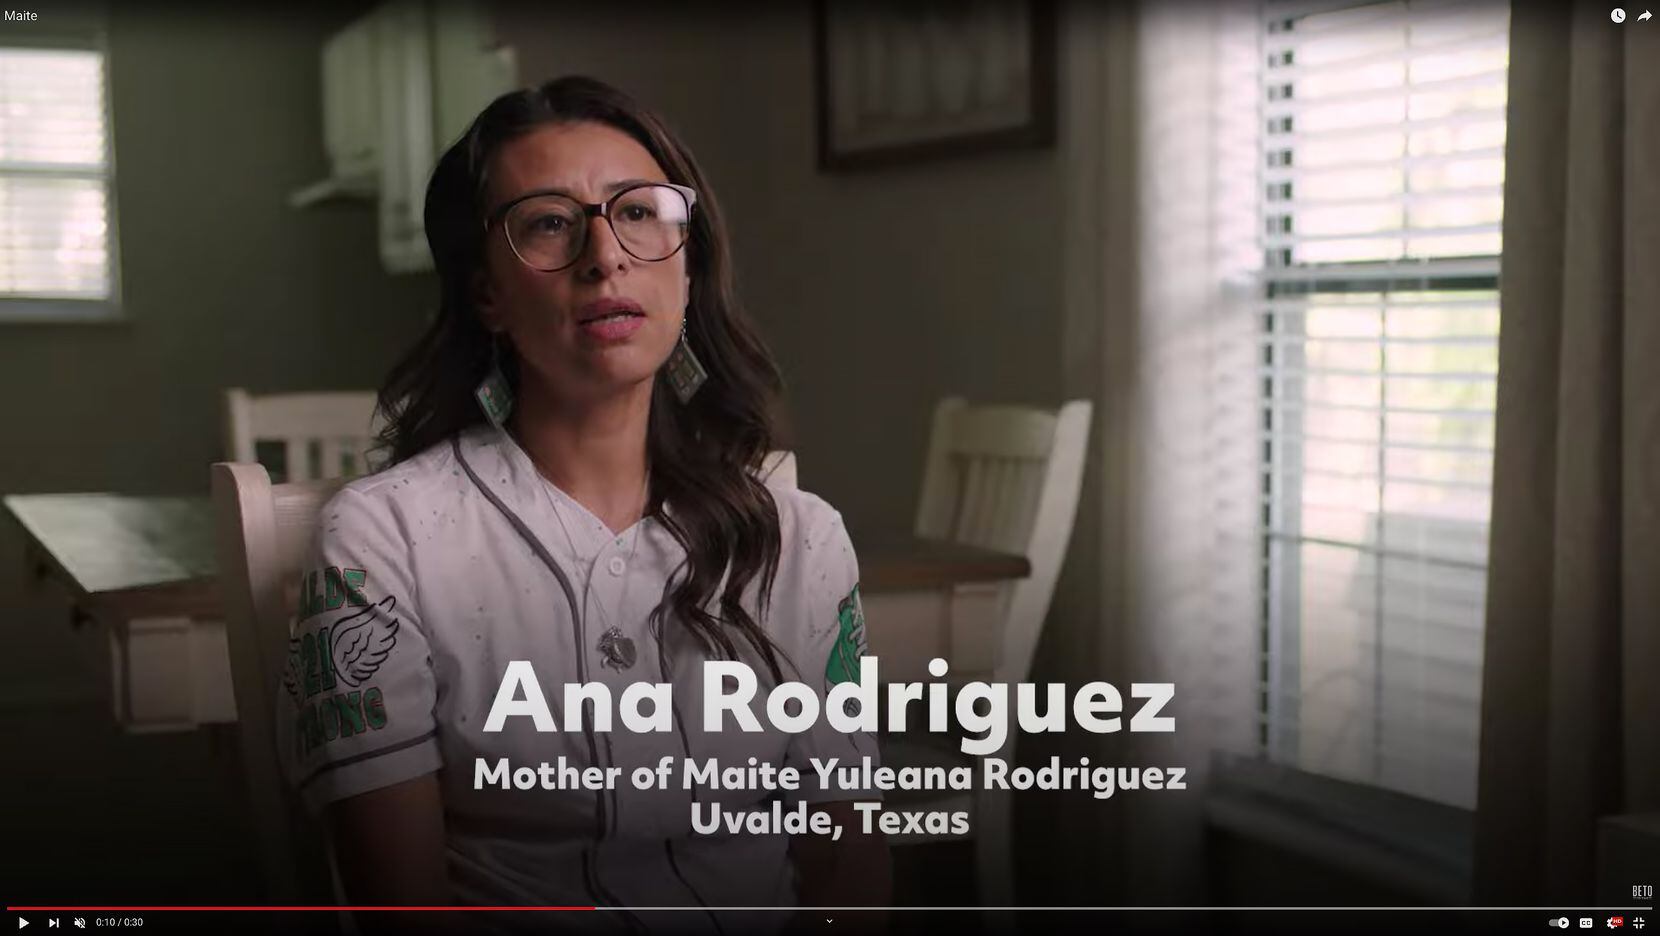 "Greg Abbott has done nothing to stop the next shooting," Ana Rodriguez, mother of Maite...